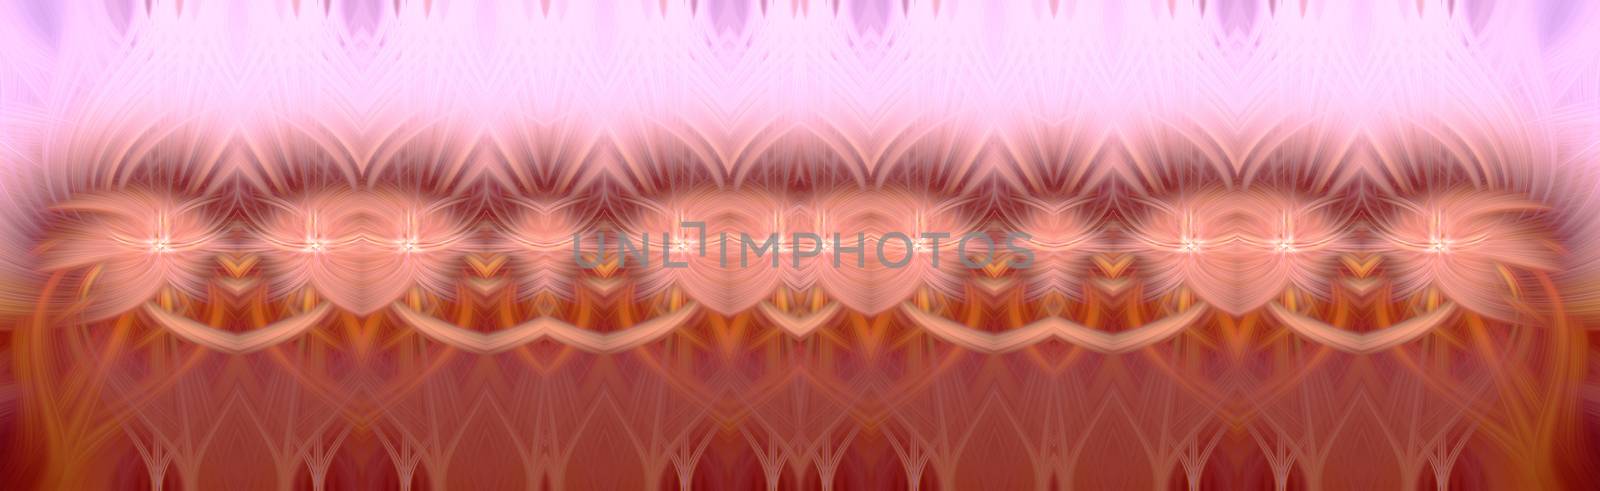 Beautiful abstract intertwined 3d fibers forming an ornament out of various symmetrical shapes. Purple, pink, and orange colors. Illustration. Panorama and banner size.